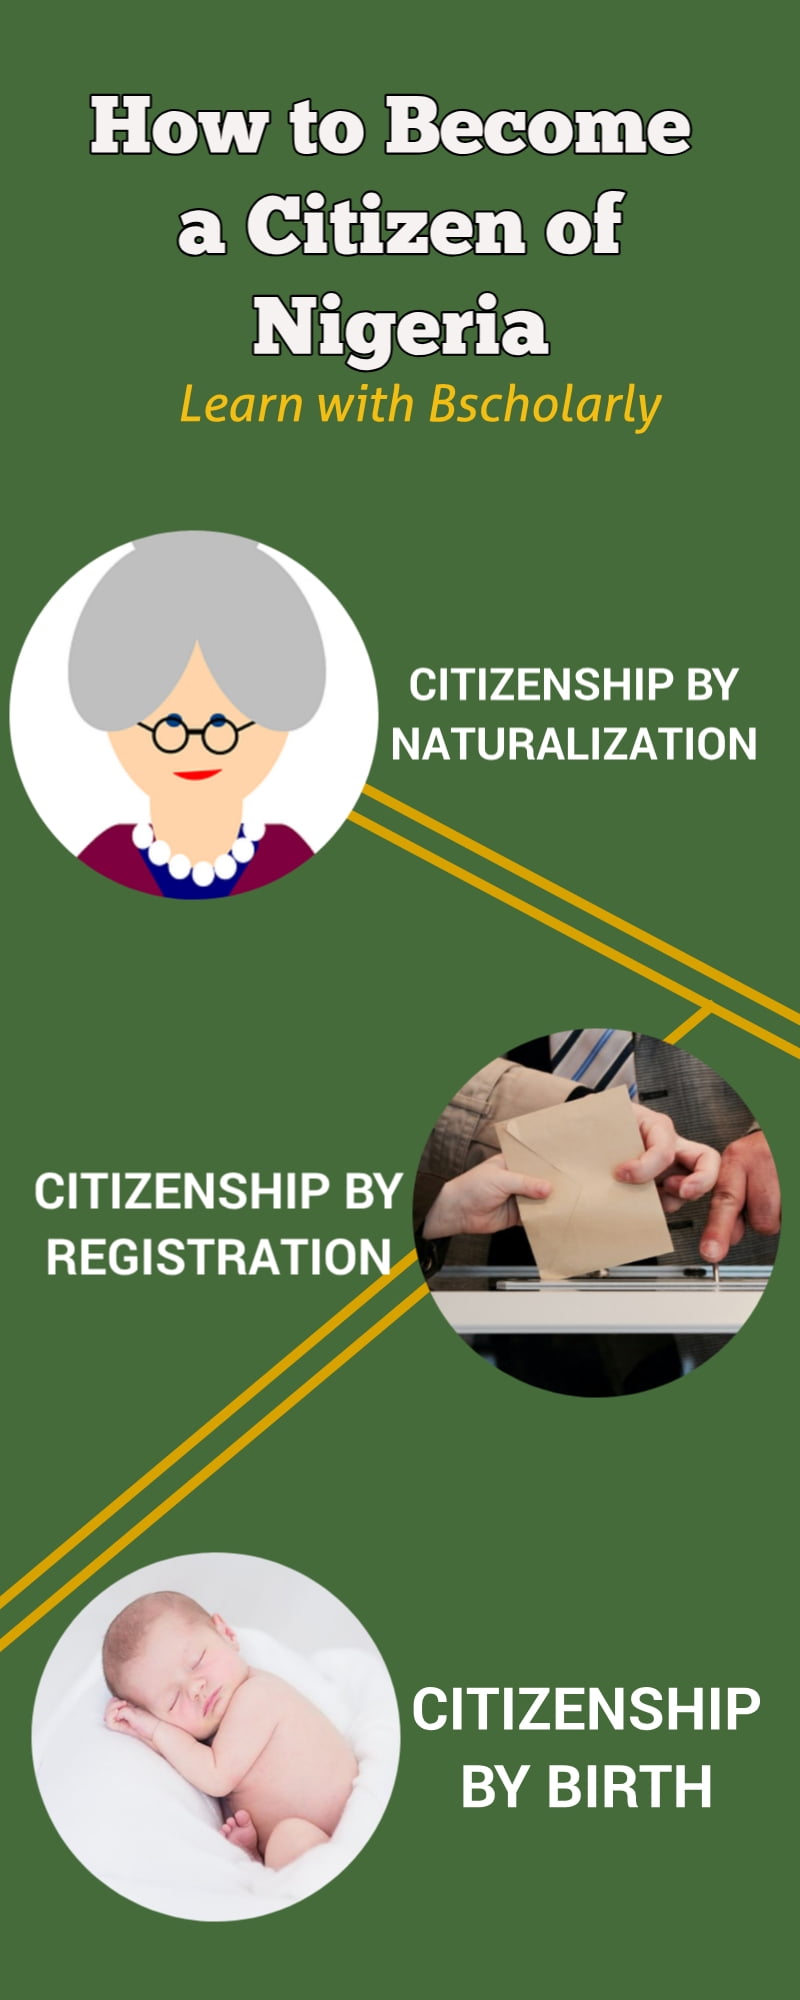 3 Ways of Acquiring Citizenship in Nigeria (With Infographics)